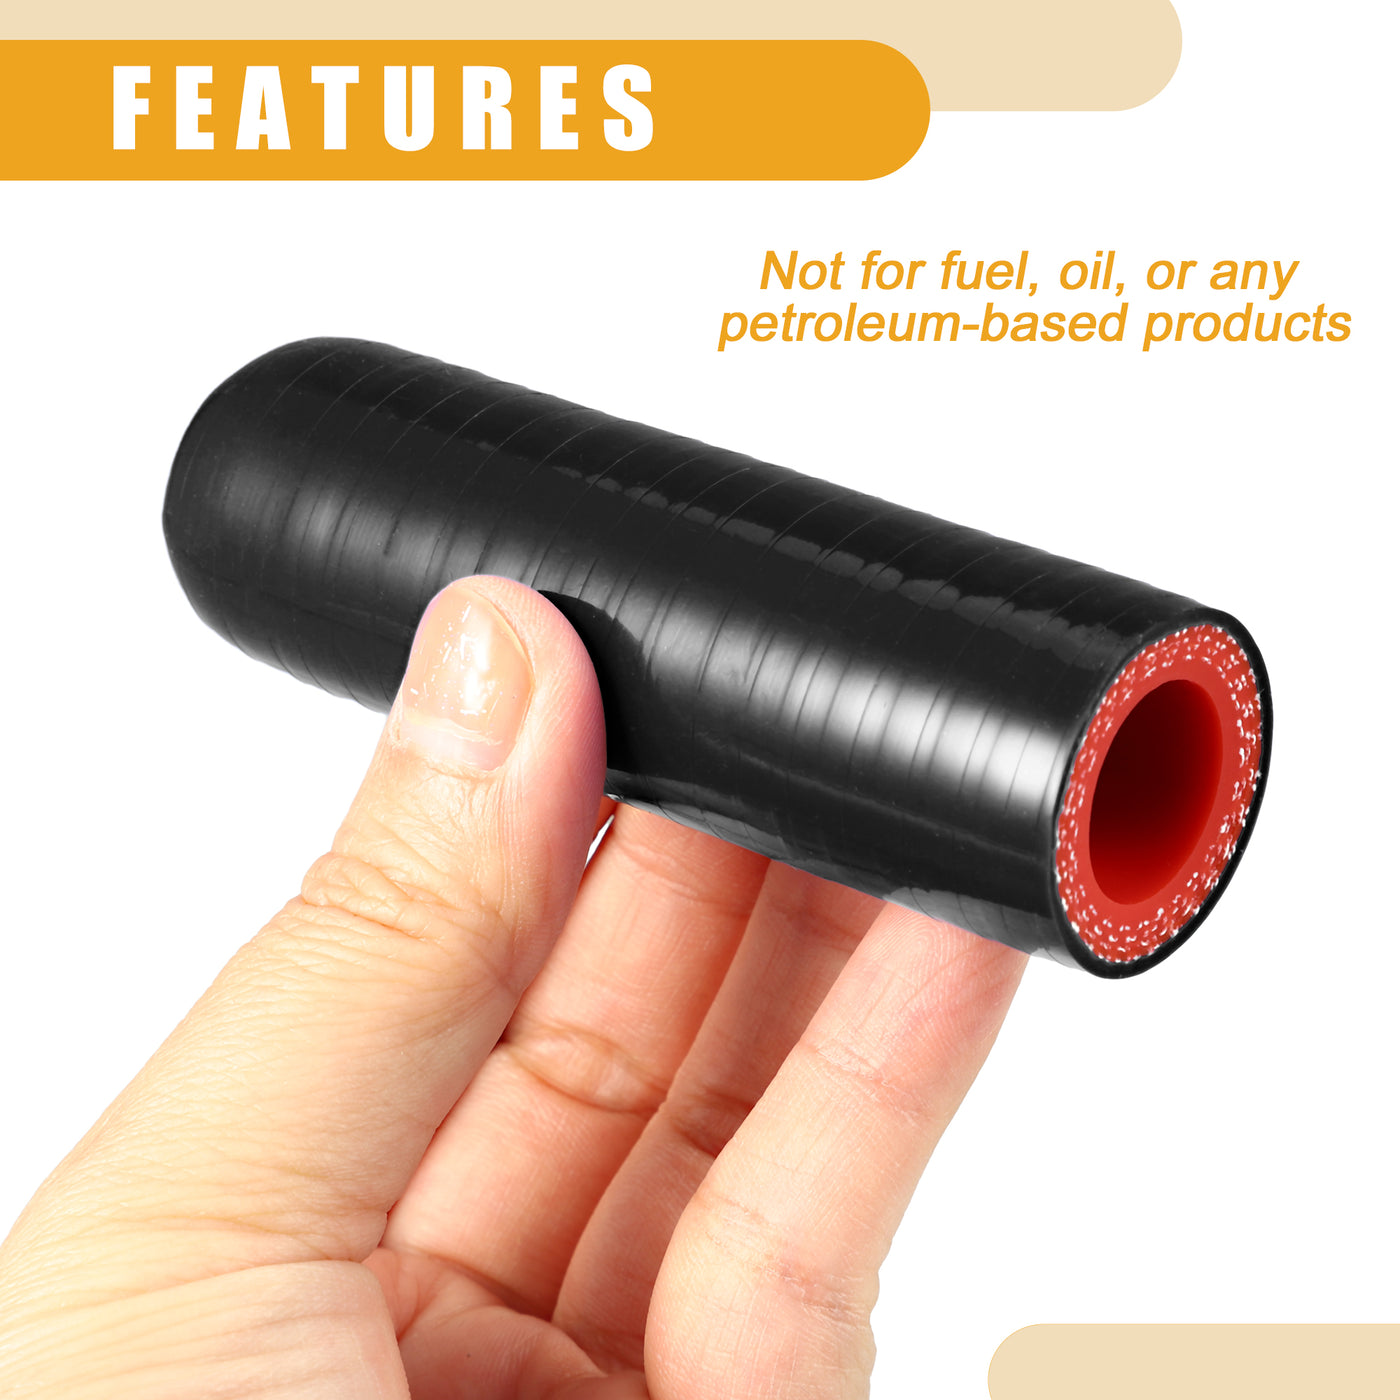 Partuto 1 Set 16mm 0.63" ID Universal Silicone Coolant Cap Intake Vacuum Hose End Plug - Car for Coolant Heater Bypass Vacuum Water Port - Silicone Black Red